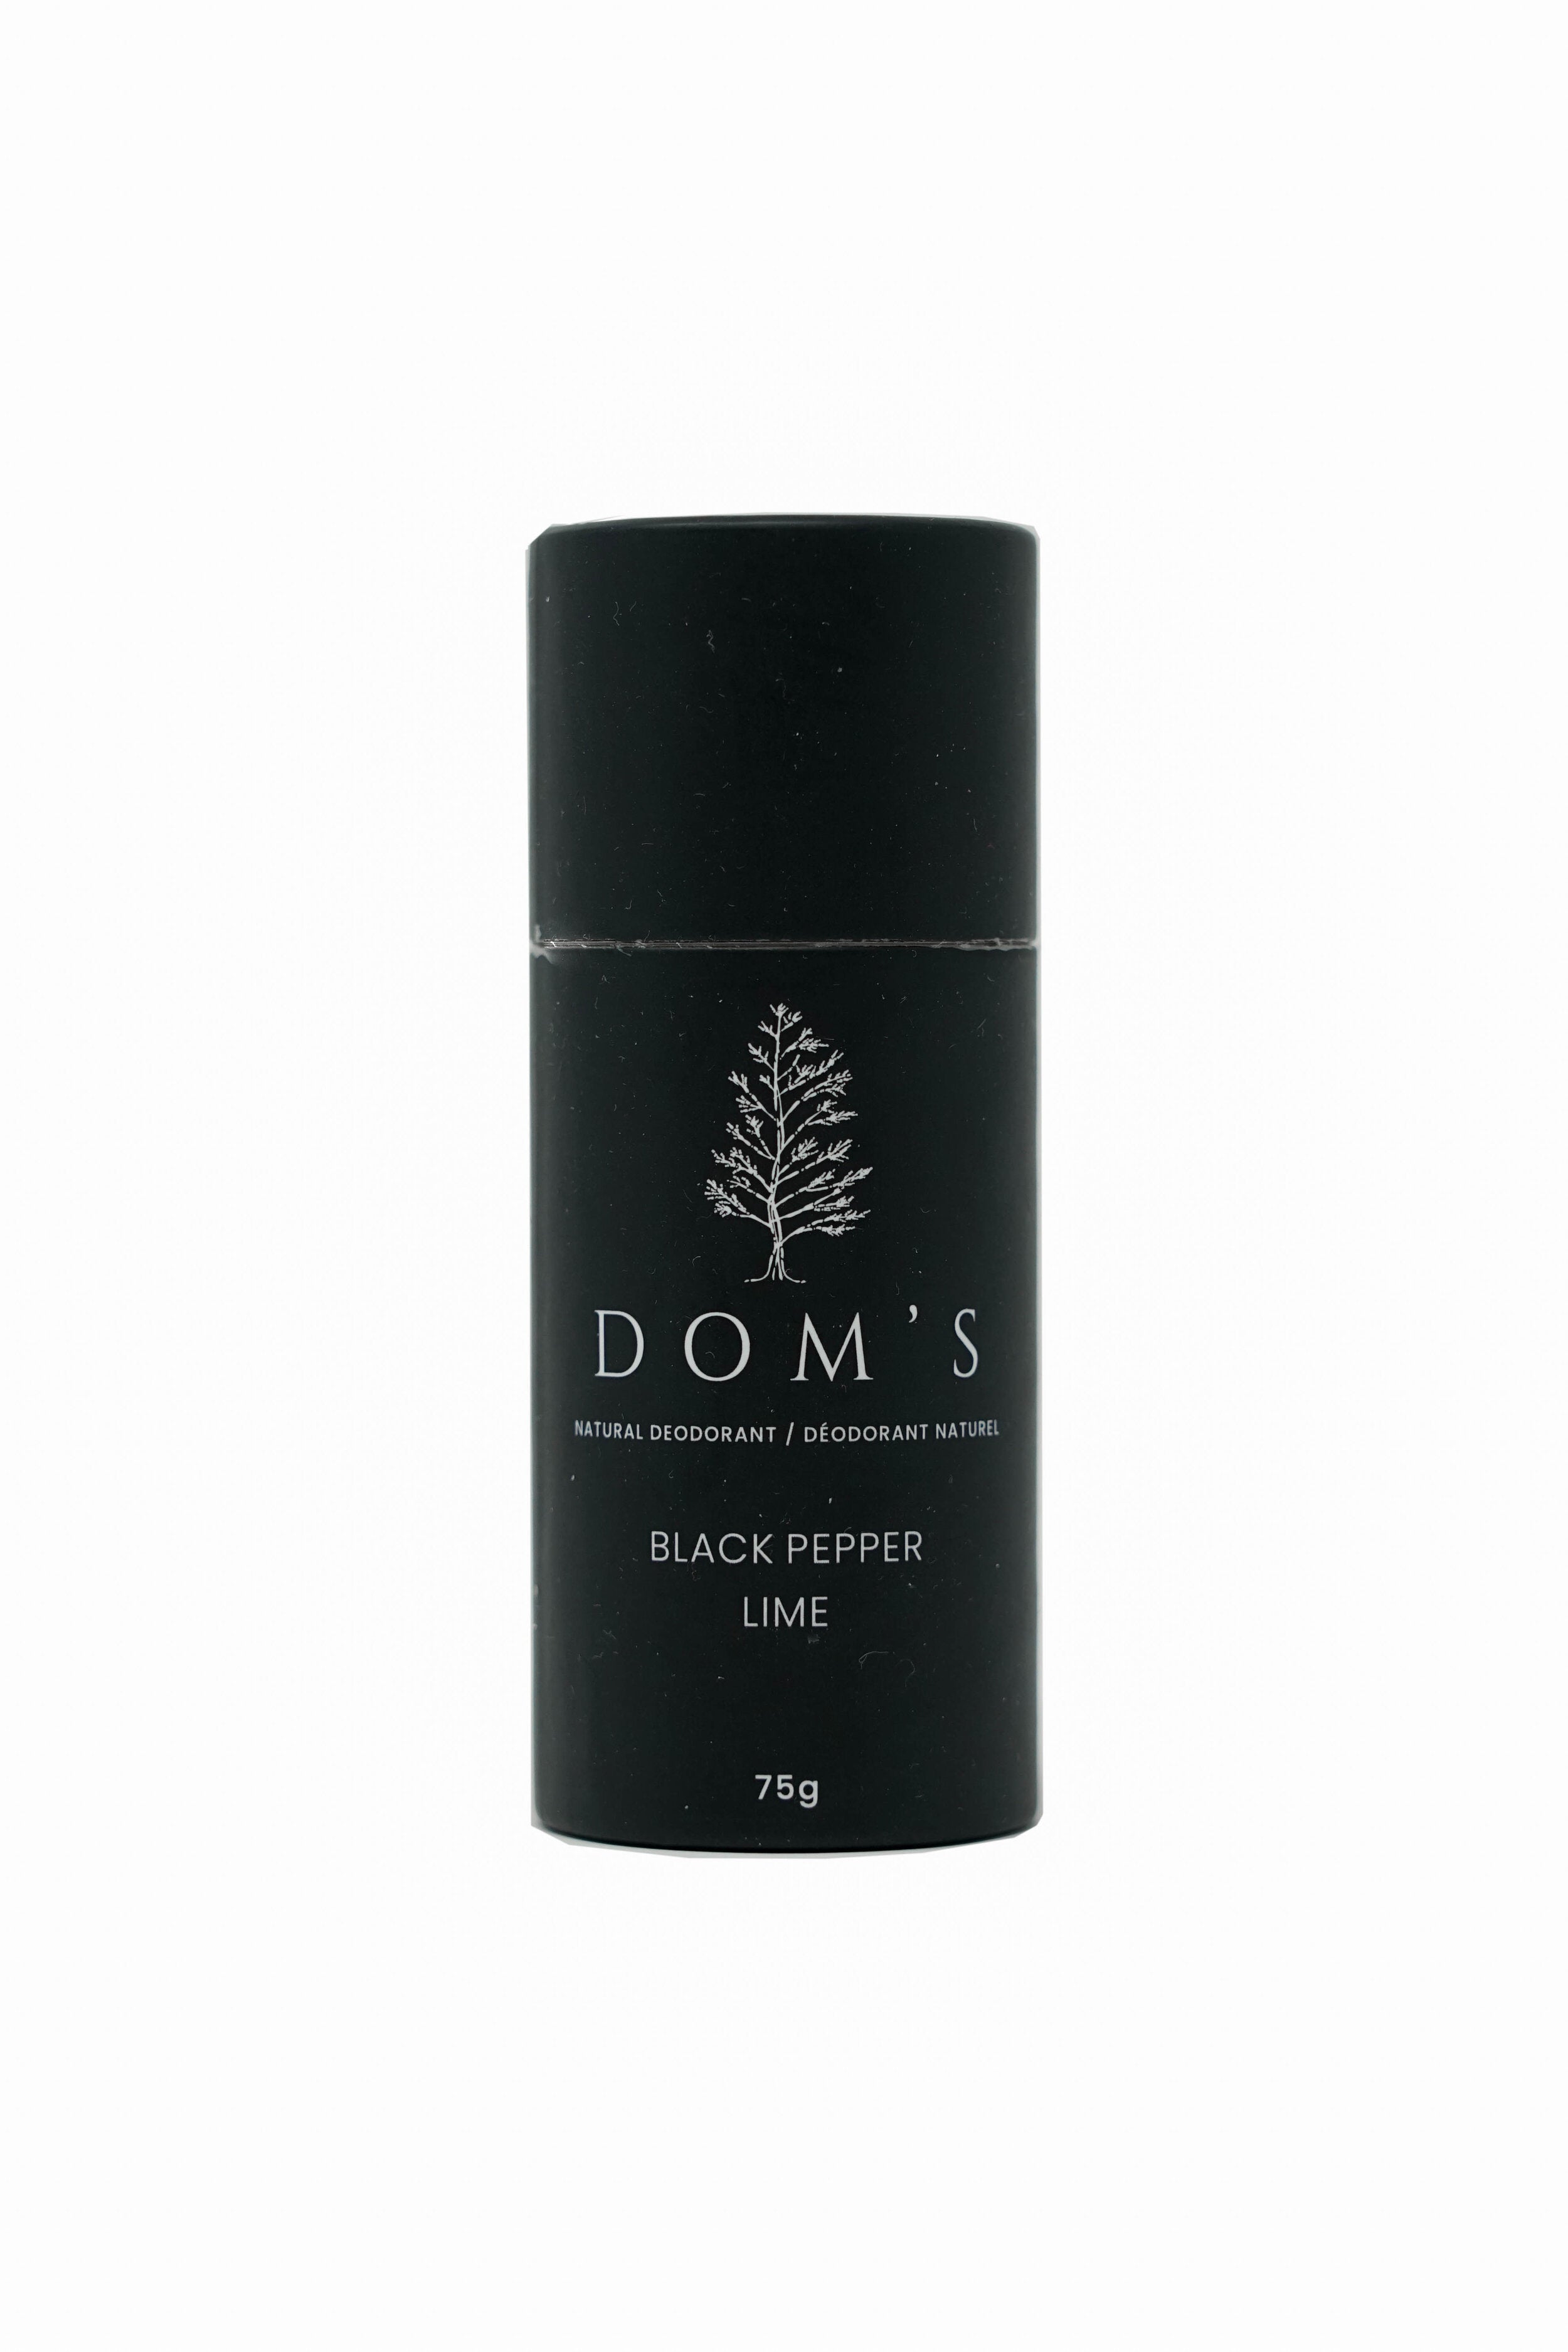 Dom's Deodorant - Black Pepper/Lime Stick 75g - WHOLESALE Deodorant - nelsonnaturals remineralizing toothpaste